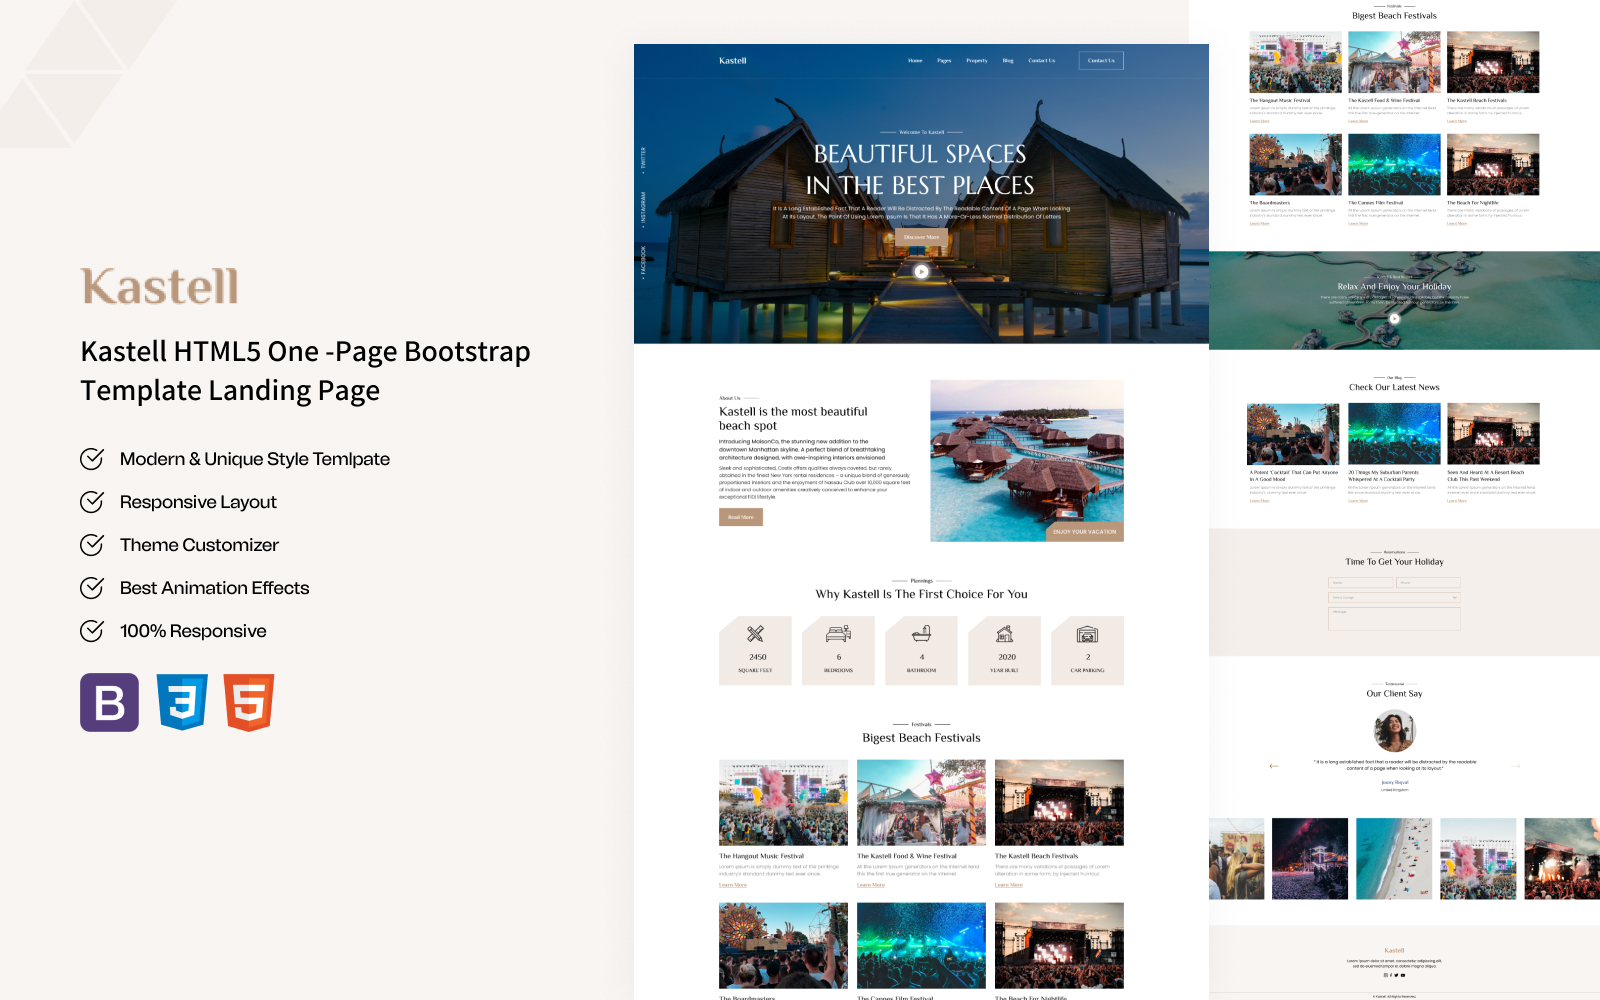 Kastell - Best Resort and Beach HTML Bootstrap Landing Page Template